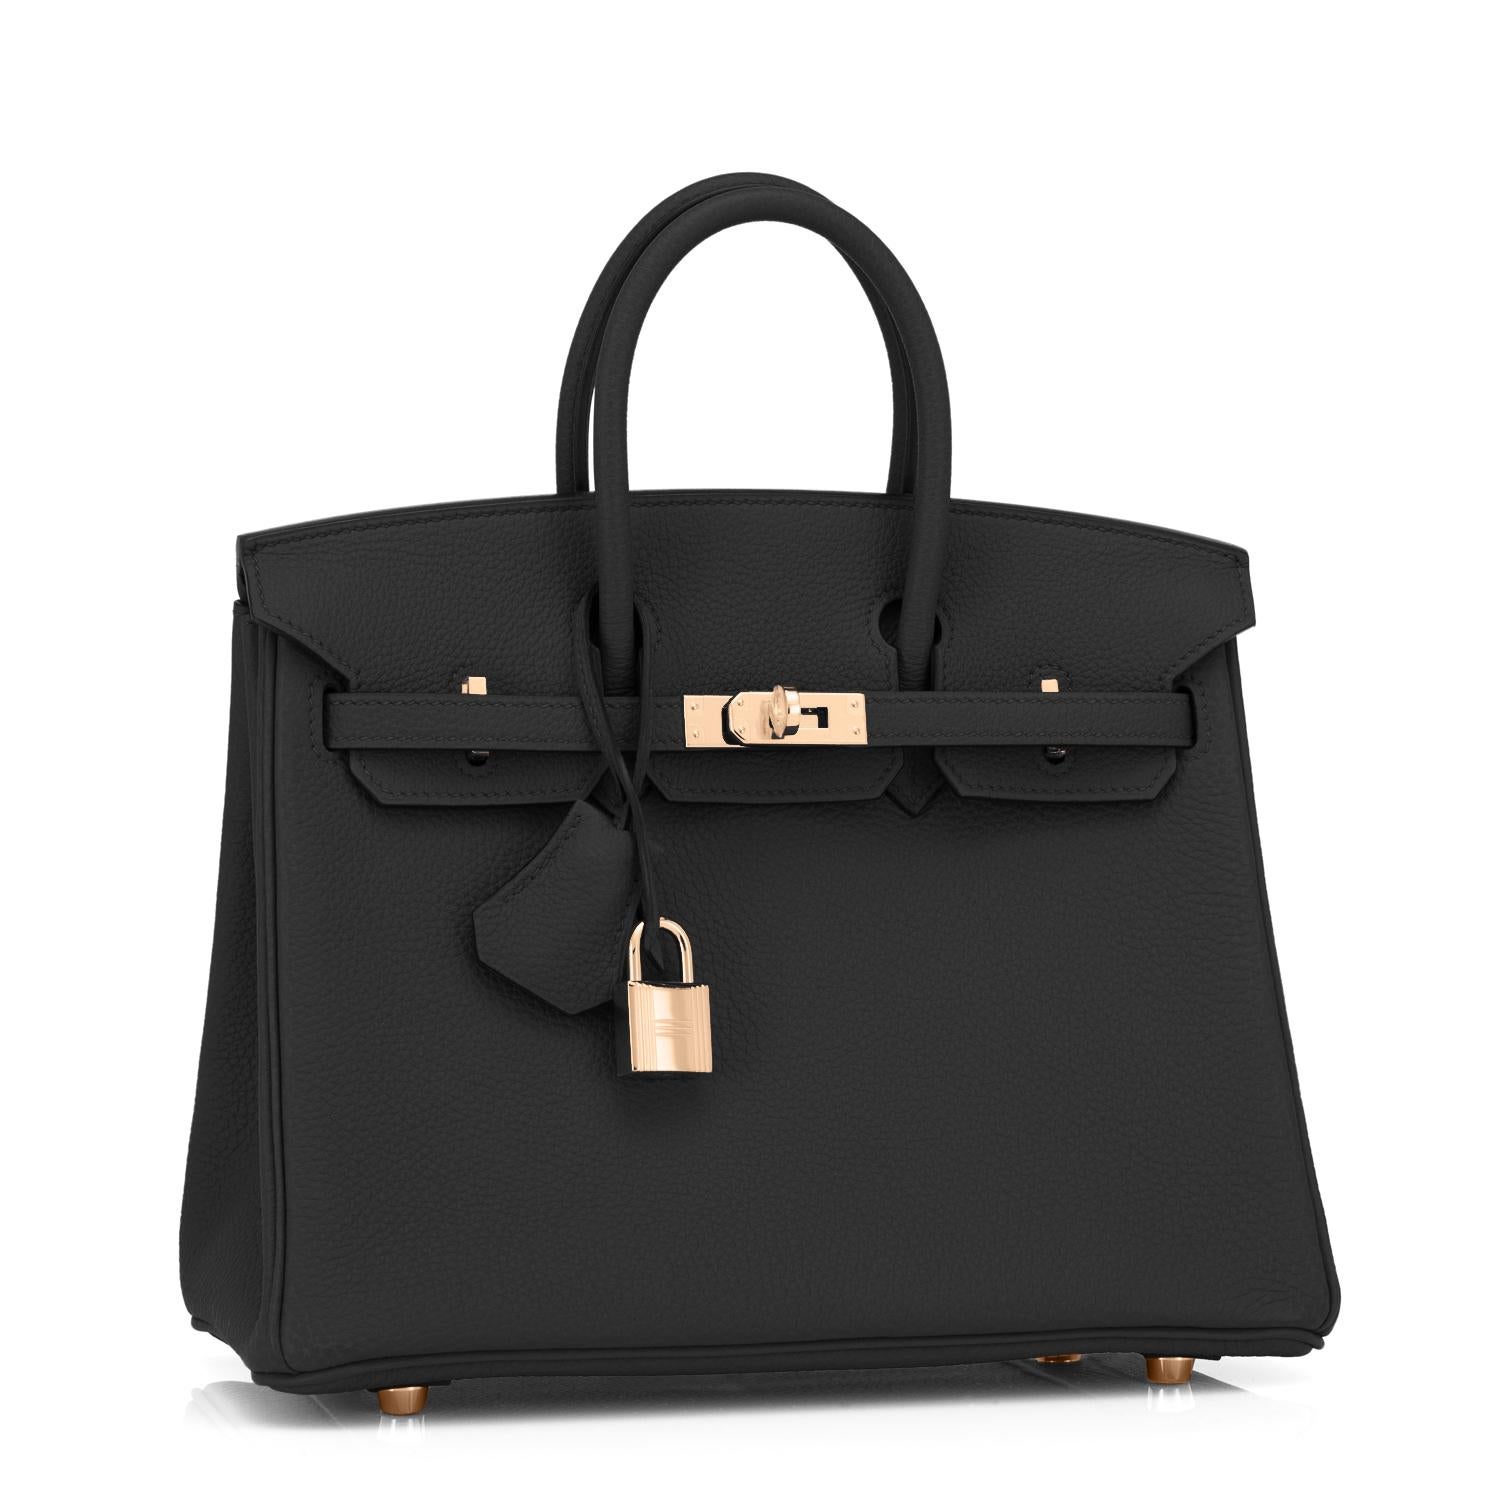 Hermes Black Baby Birkin 25cm Togo Gold Hardware Jewel Y stamp, 2020
So rare in production, and the most coveted bag right now!
Brand New in Box. Store Fresh. Pristine Condition (with plastic on hardware) 
Just purchased from Hermes store! Bag bears